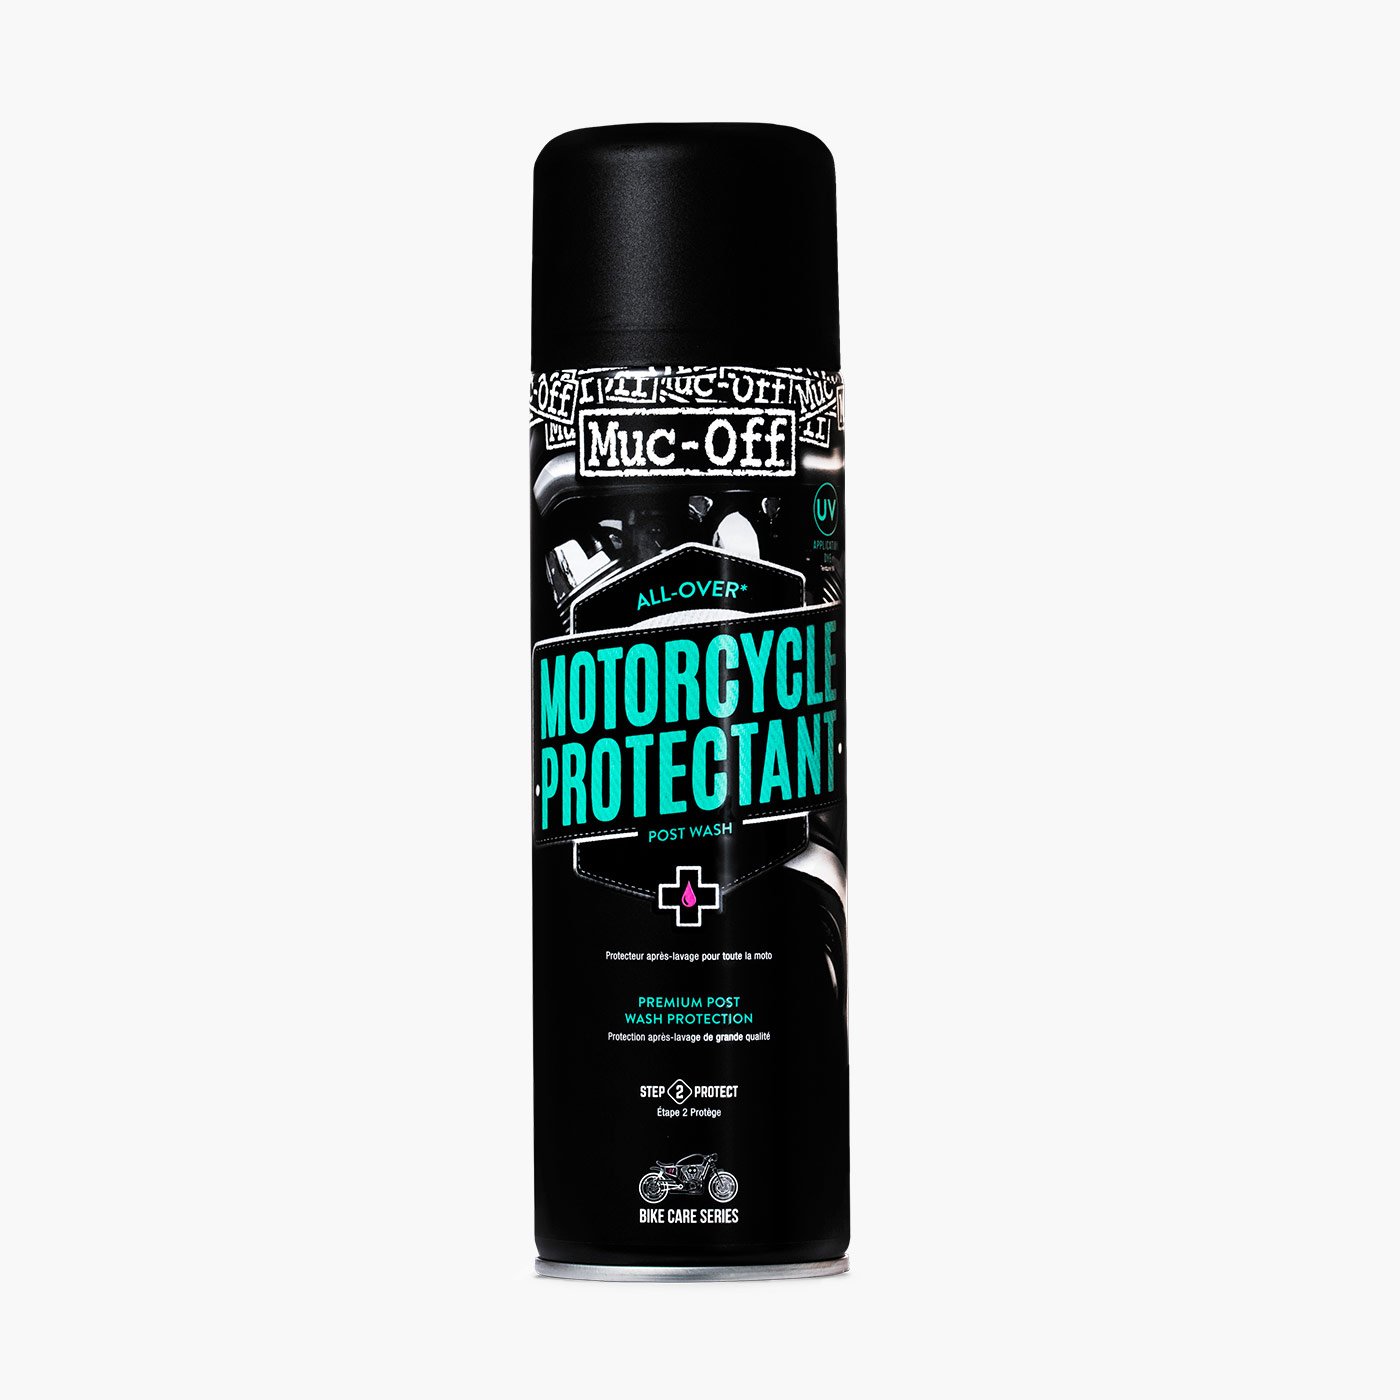 Muc-Off Protector - Motorcycle Protectant